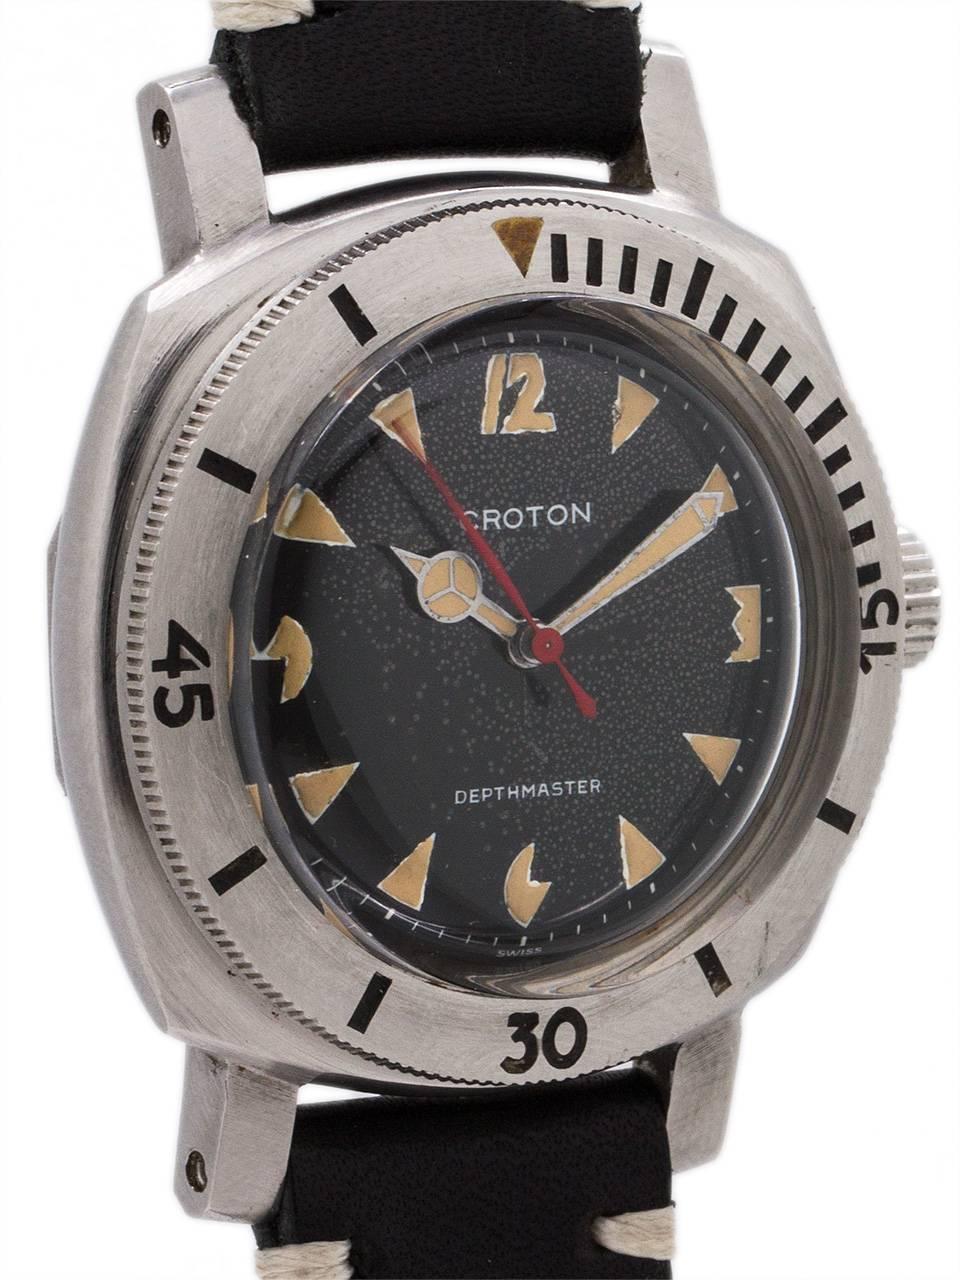 Croton Depthmaster 1000, stainless steel cushion shaped diver’s model with heavy and rugged lugs, wide, raised elapsed time bezel, and with dramatic glossy black original dial with patina’d art deco inspired luminous indexes and hands and red sweep